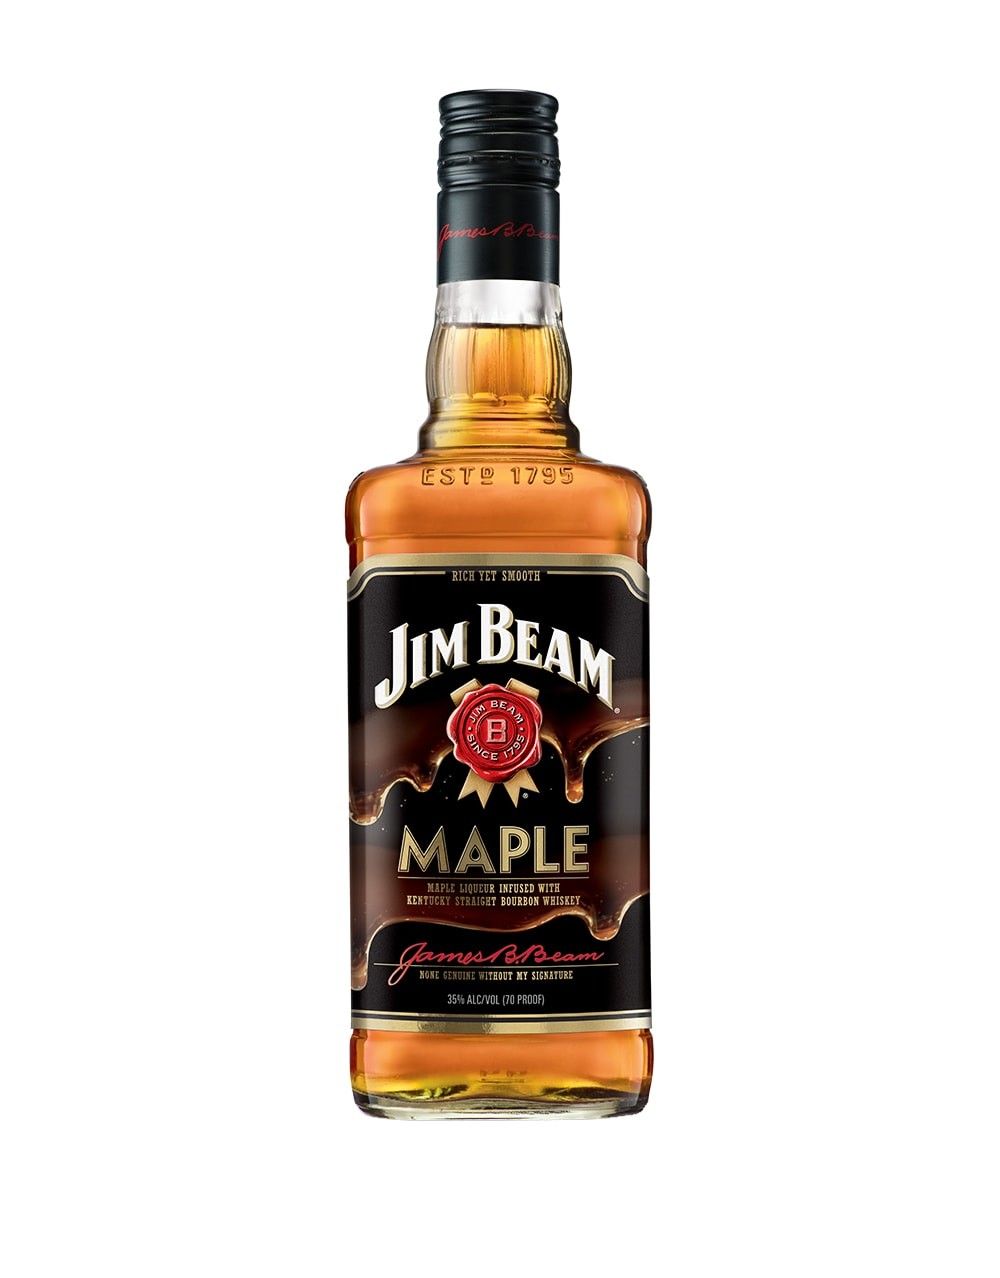 Jim Beam Maple Bourbon Whiskey | Buy Online or Send as a